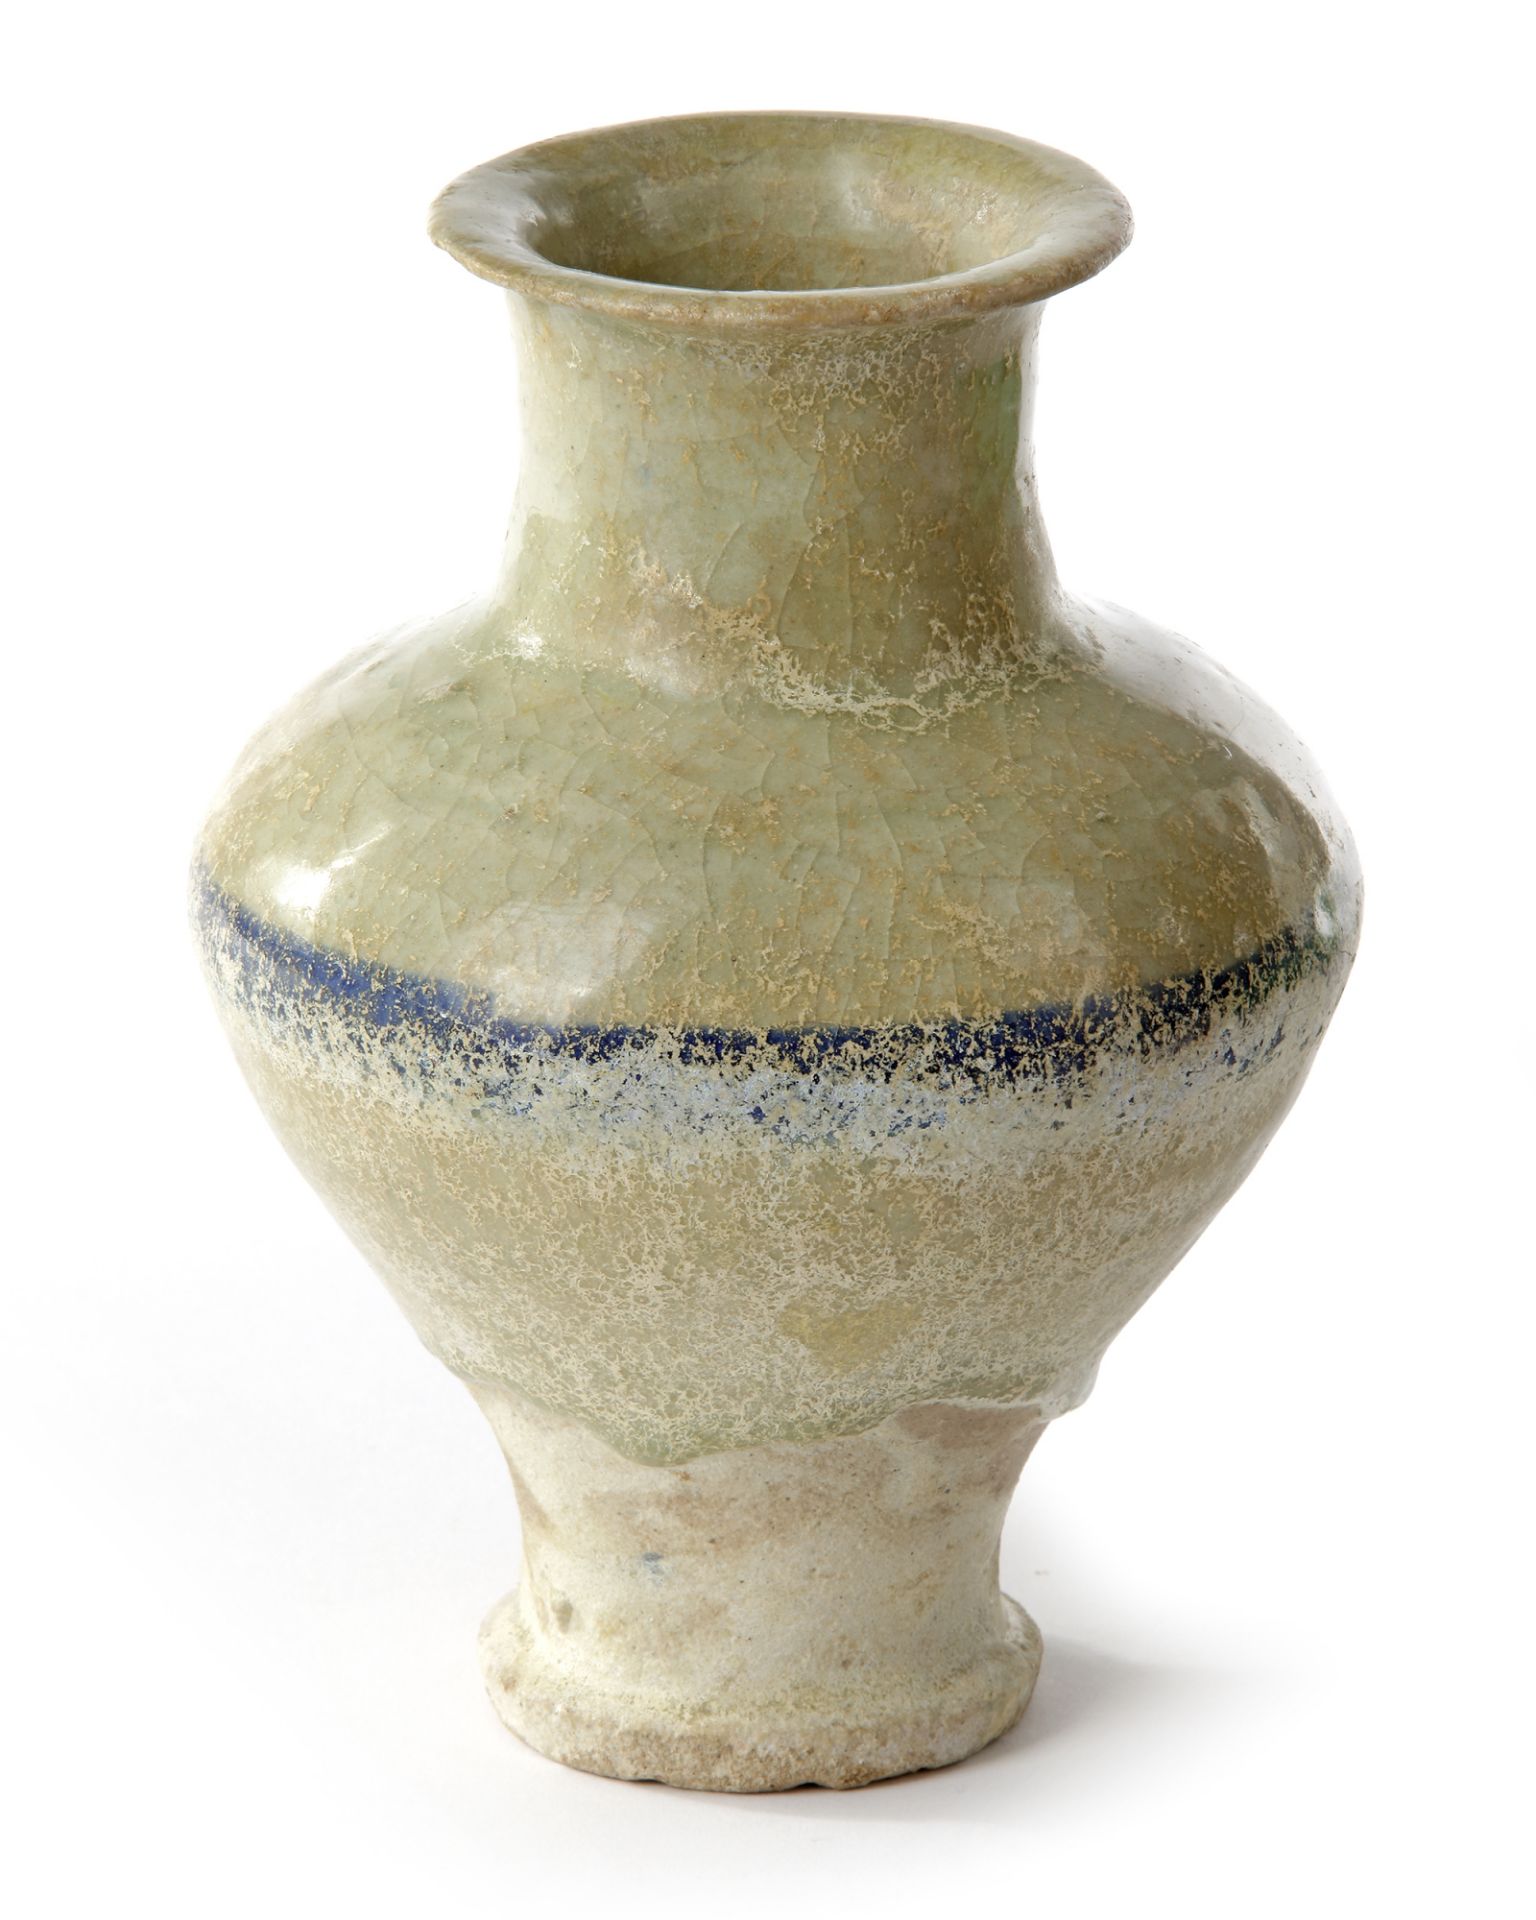 A RAQQA BLUE AND WHITE POTTERY JAR, SYRIA, 13TH CENTURY - Image 7 of 7